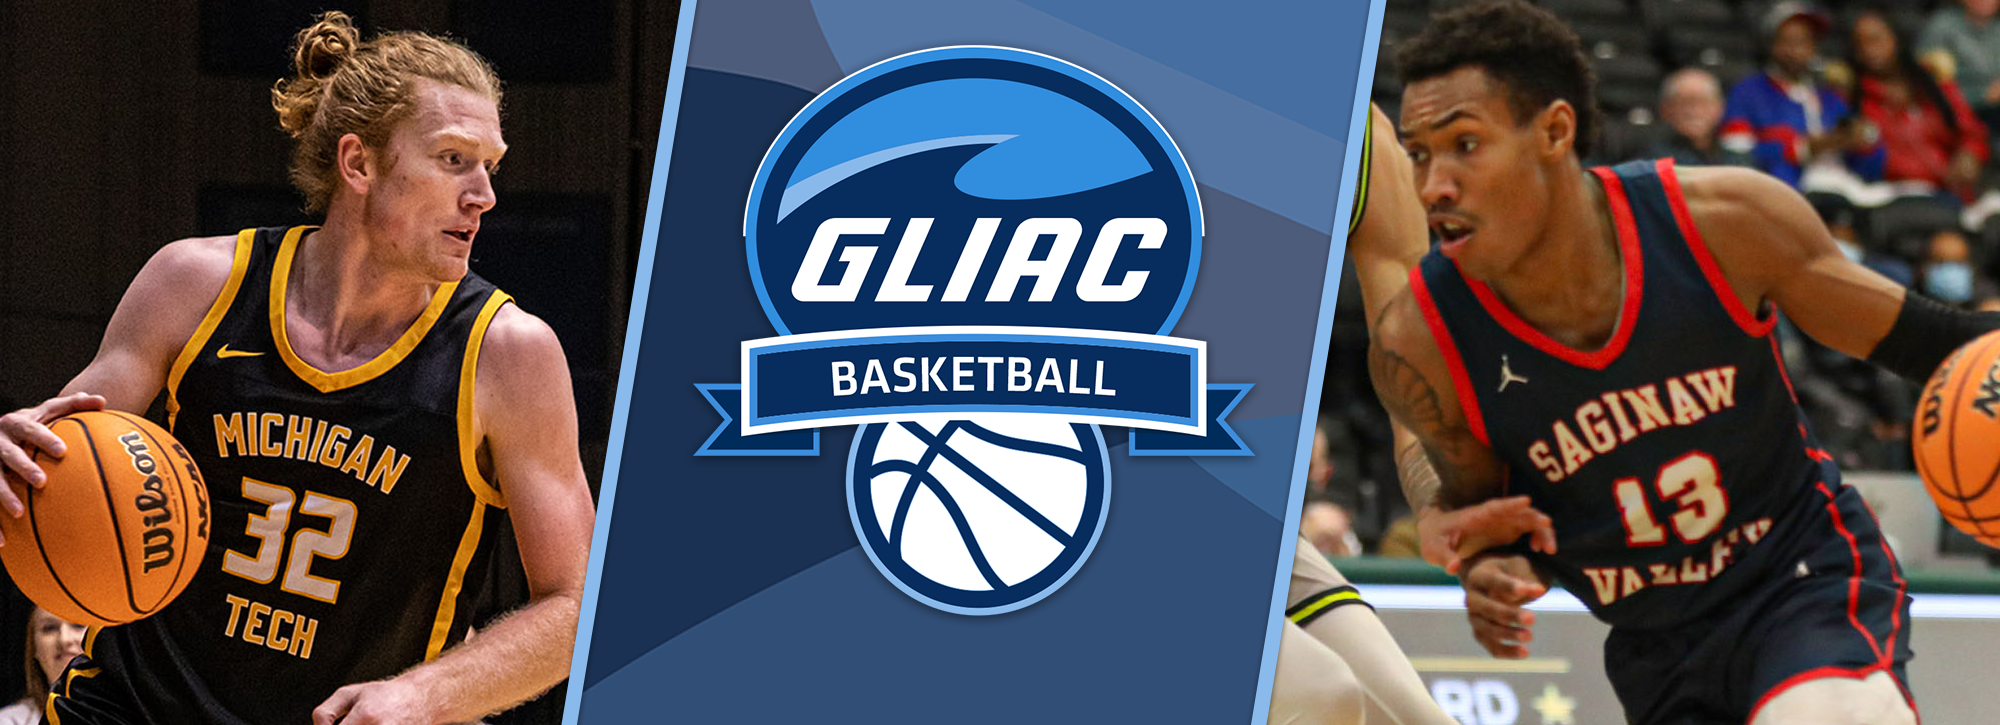 Tech's Bell and SVSU's Smith receive GLIAC Men's Basketball Players of the Week honors